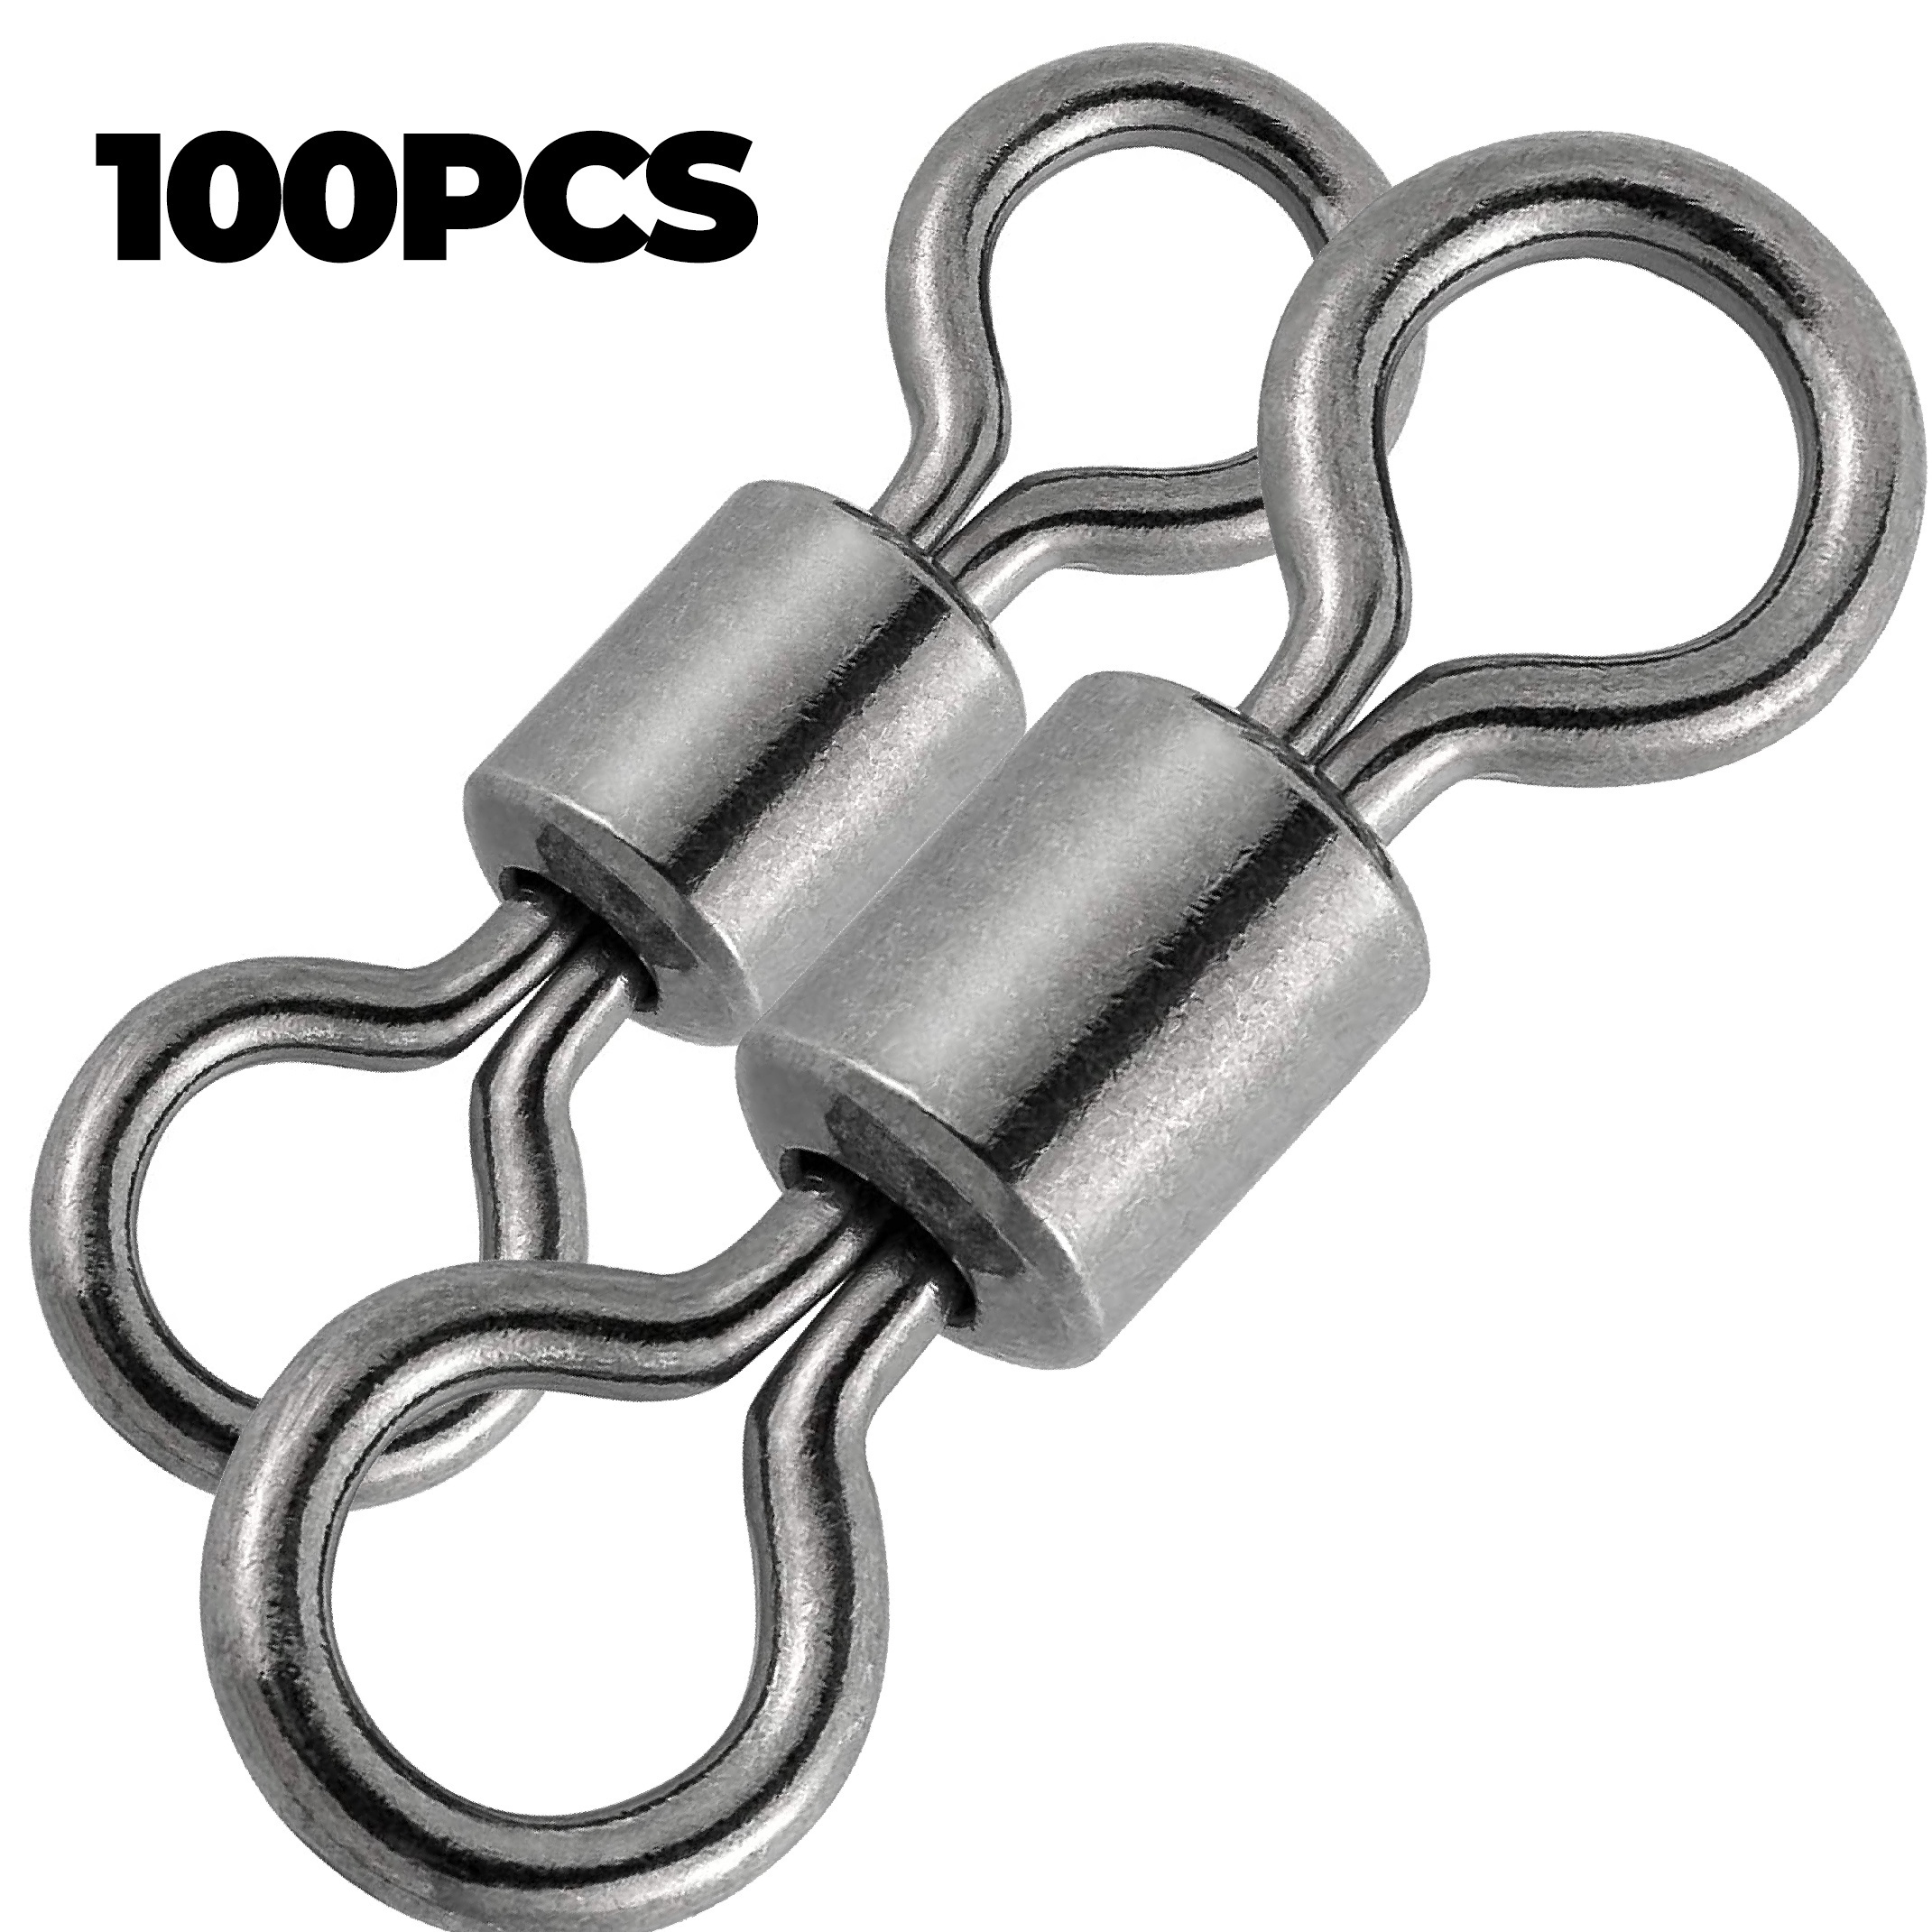 100pcs Premium Fishing Swivels Set - Ball Bearing Rolling Barrel Swivels  with Snap Connector for Saltwater and Freshwater Fishing - Strong Hook Line  C